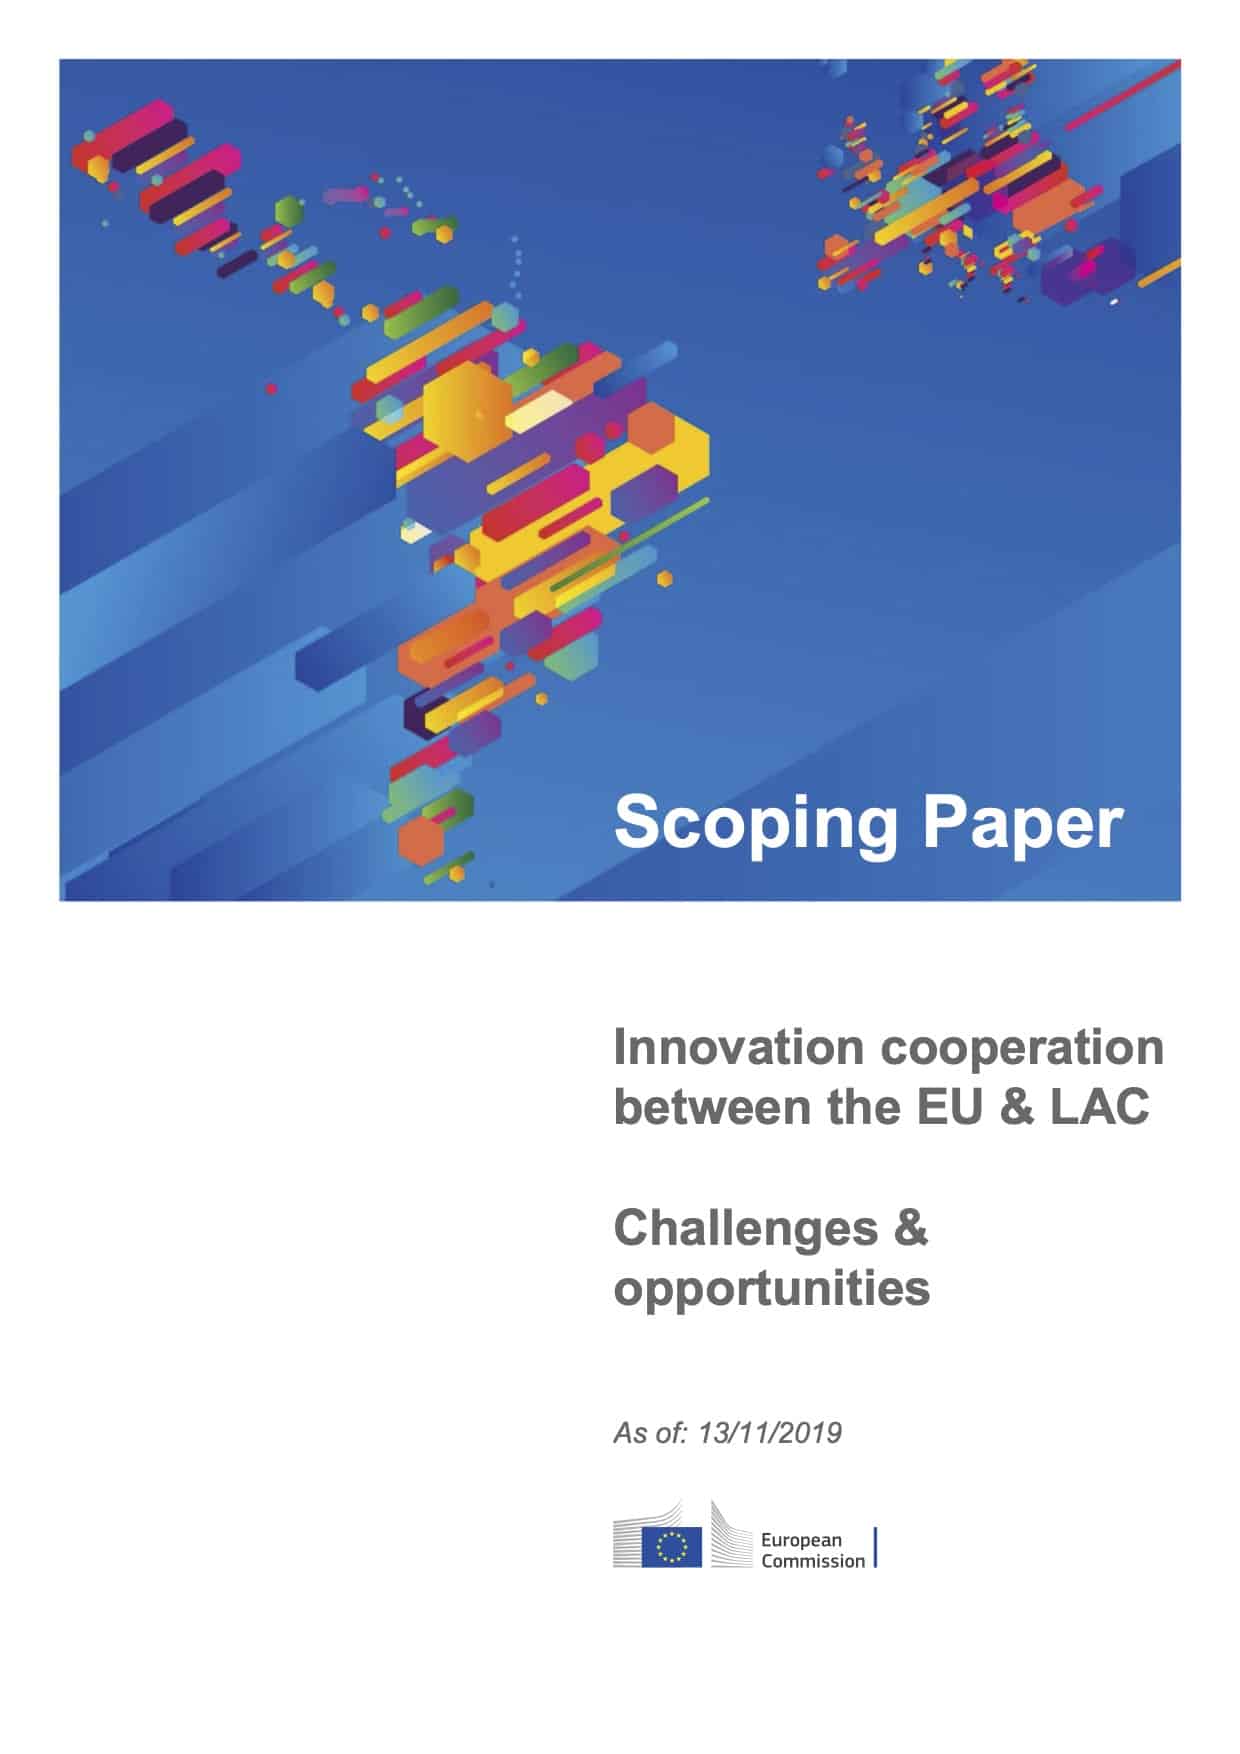 Innovation cooperation between the EU & LAC – Challenges & opportunities